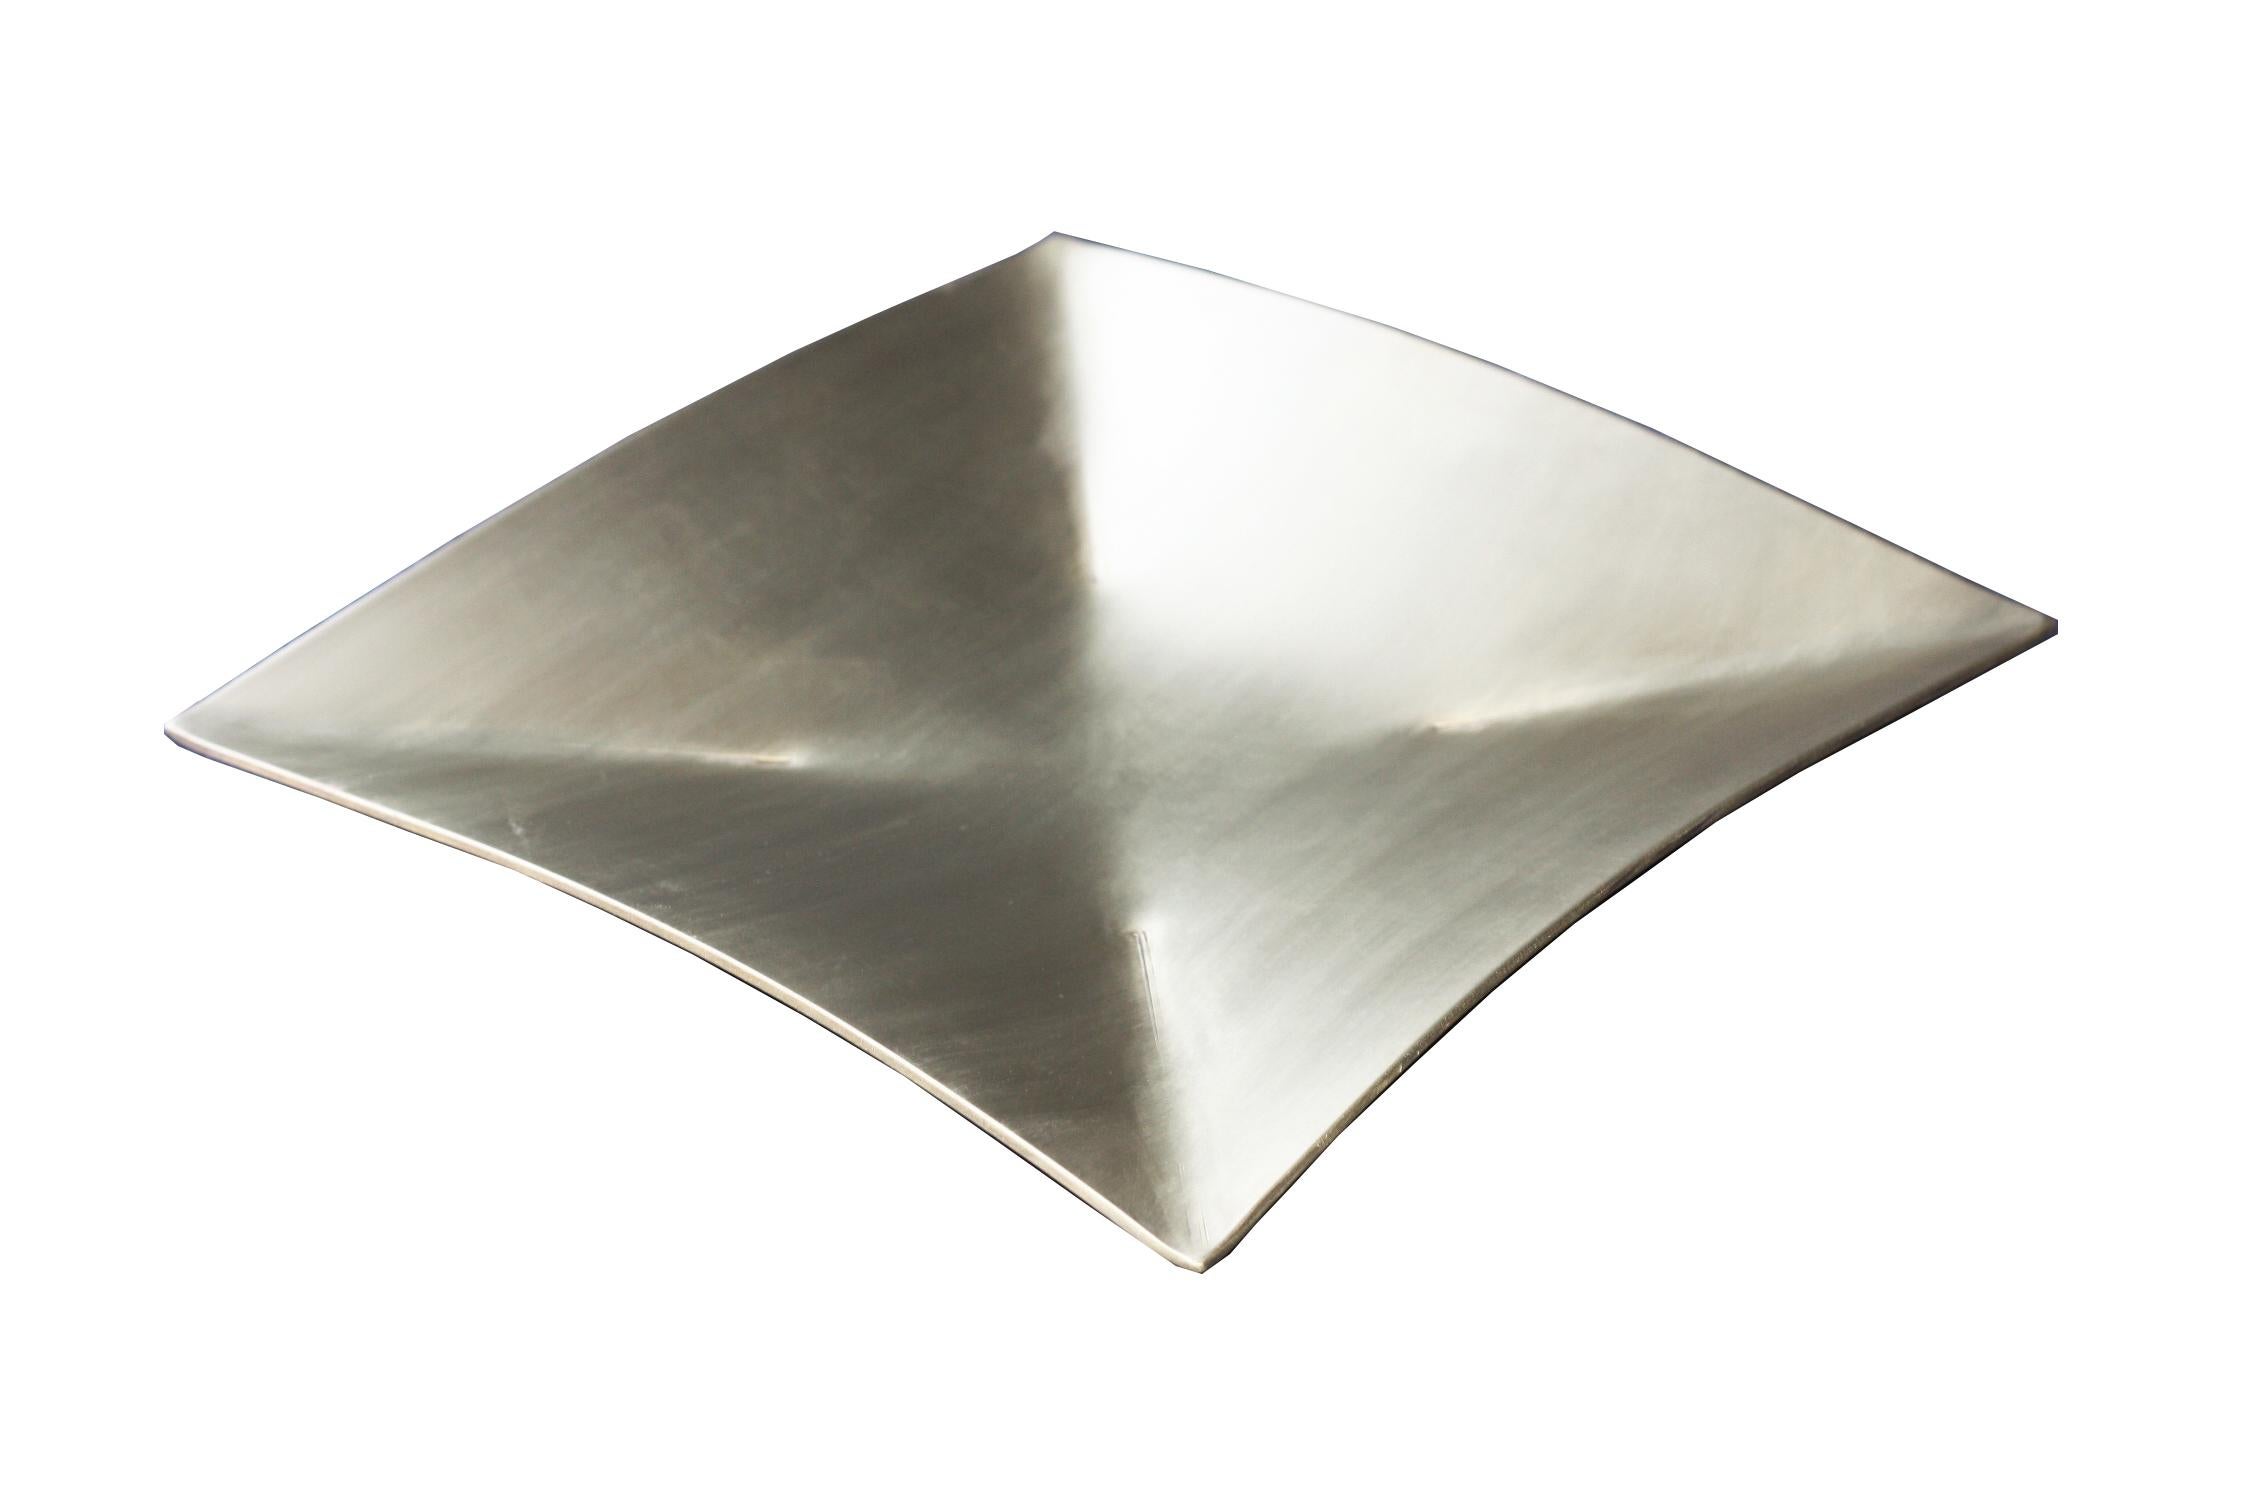 Metal Tray in Raw Waxed Aluminum, Origami Style, Contemporary Design by Mtharu In New Condition For Sale In Calgary, Alberta